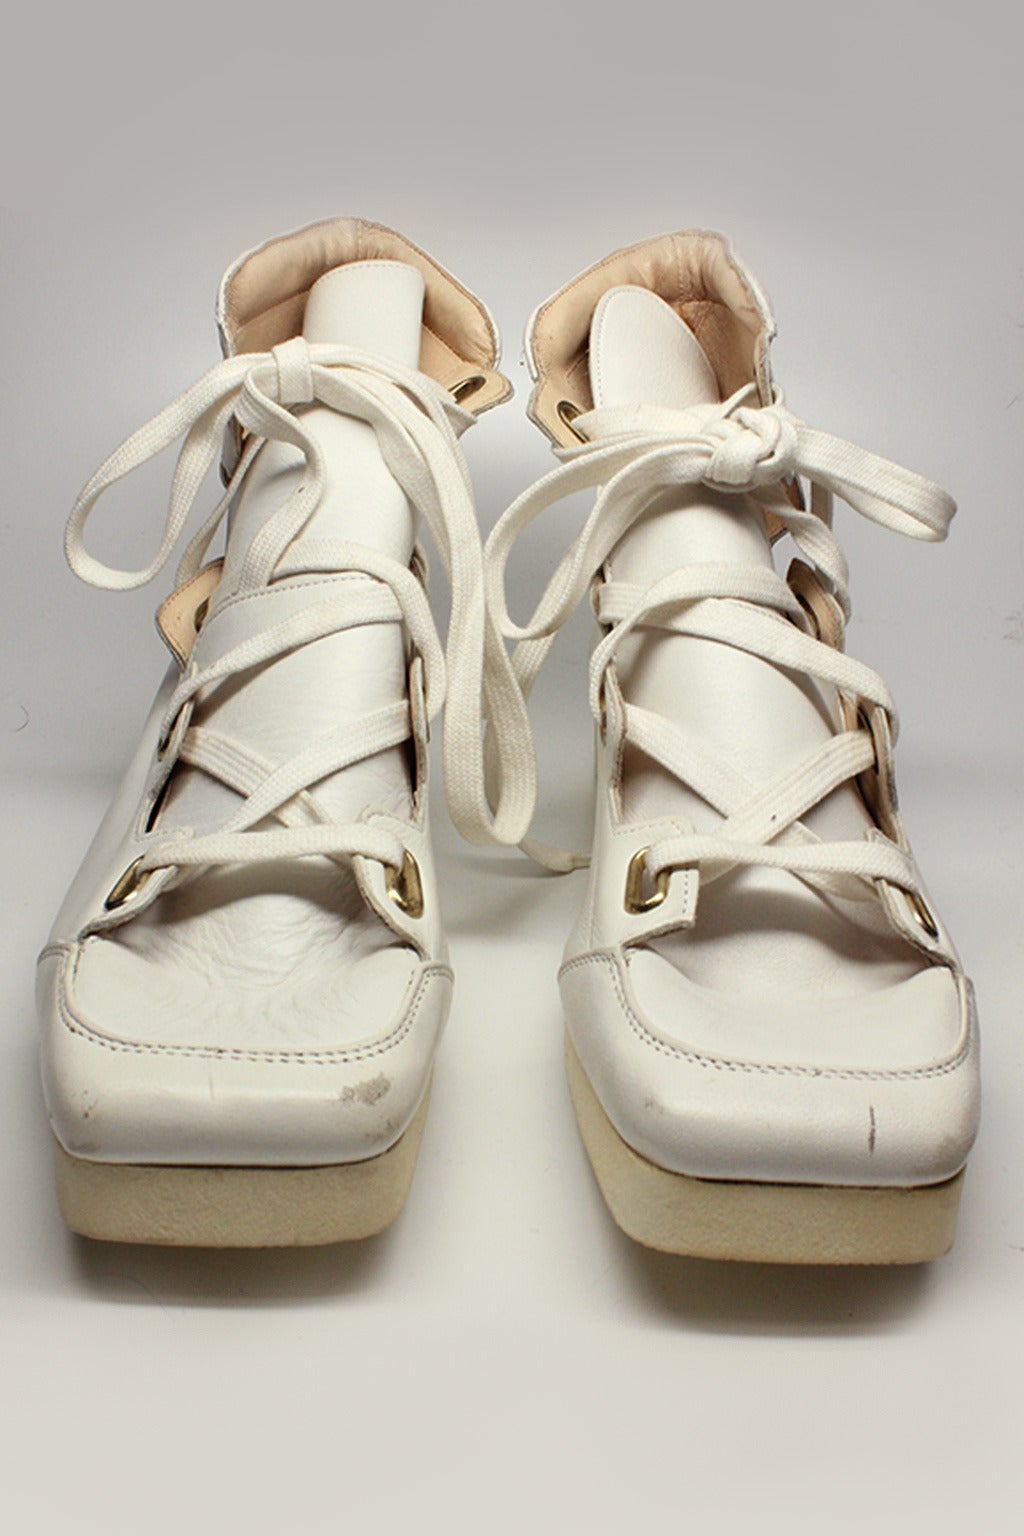 These World's End sneakers are in white leather with a triple tongue and gold rectangular eyelets. They are a reissue made in the late 80's from the iconic Witches Collection of the early 80's.